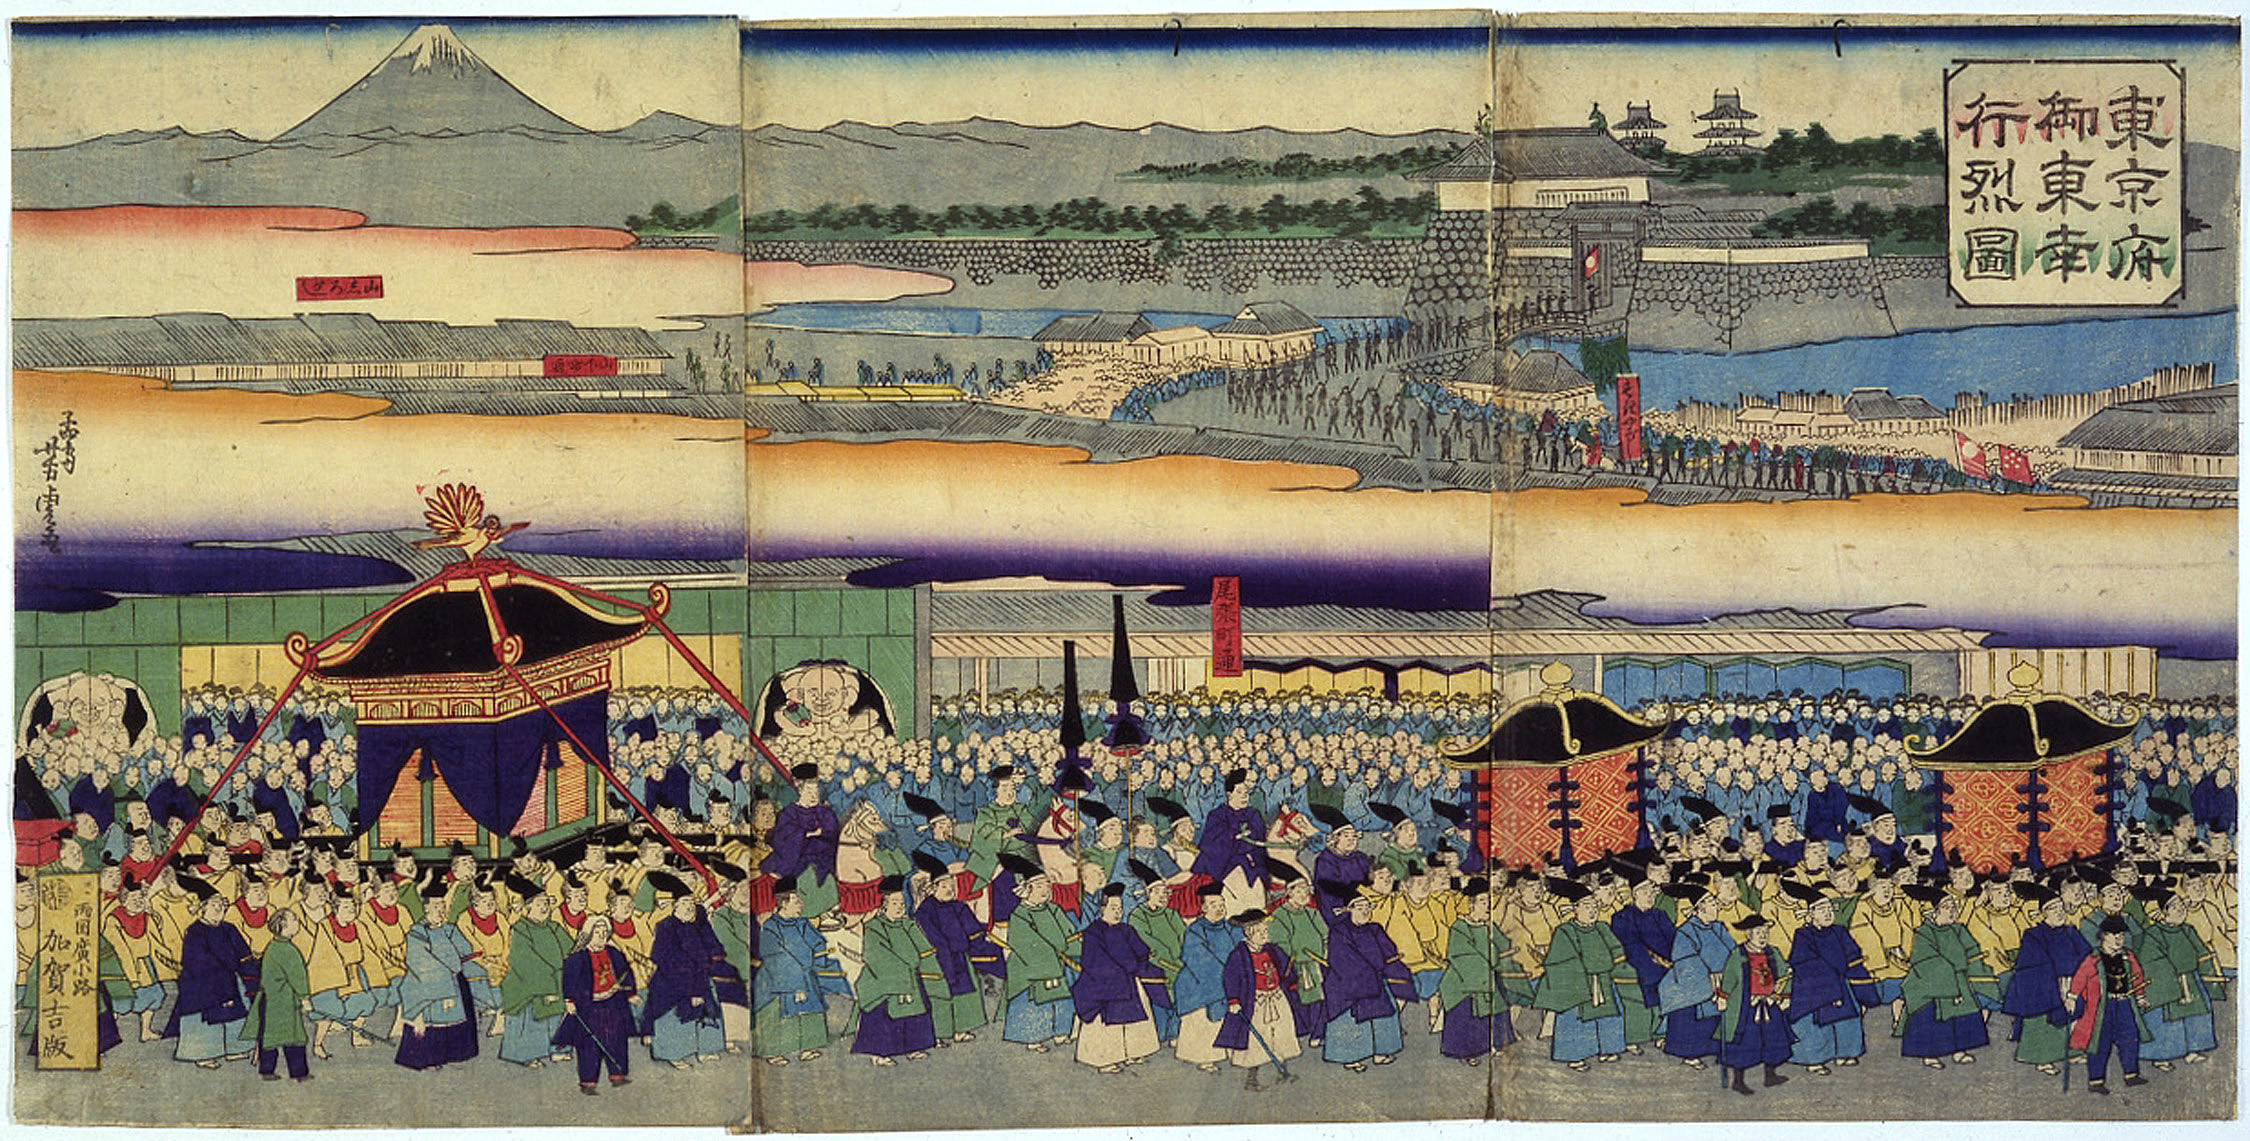 A woodblock print by Utagawa Yoshitora shows the parade of Emperor Meiji and his followers heading from Kyoto to Tokyo, renamed from Edo, in 1869 following the Meiji Restoration in the previous year. With the relocation of the Imperial Palace, Tokyo officially became Japan’s capital. | EDO-TOKYO MUSEUM